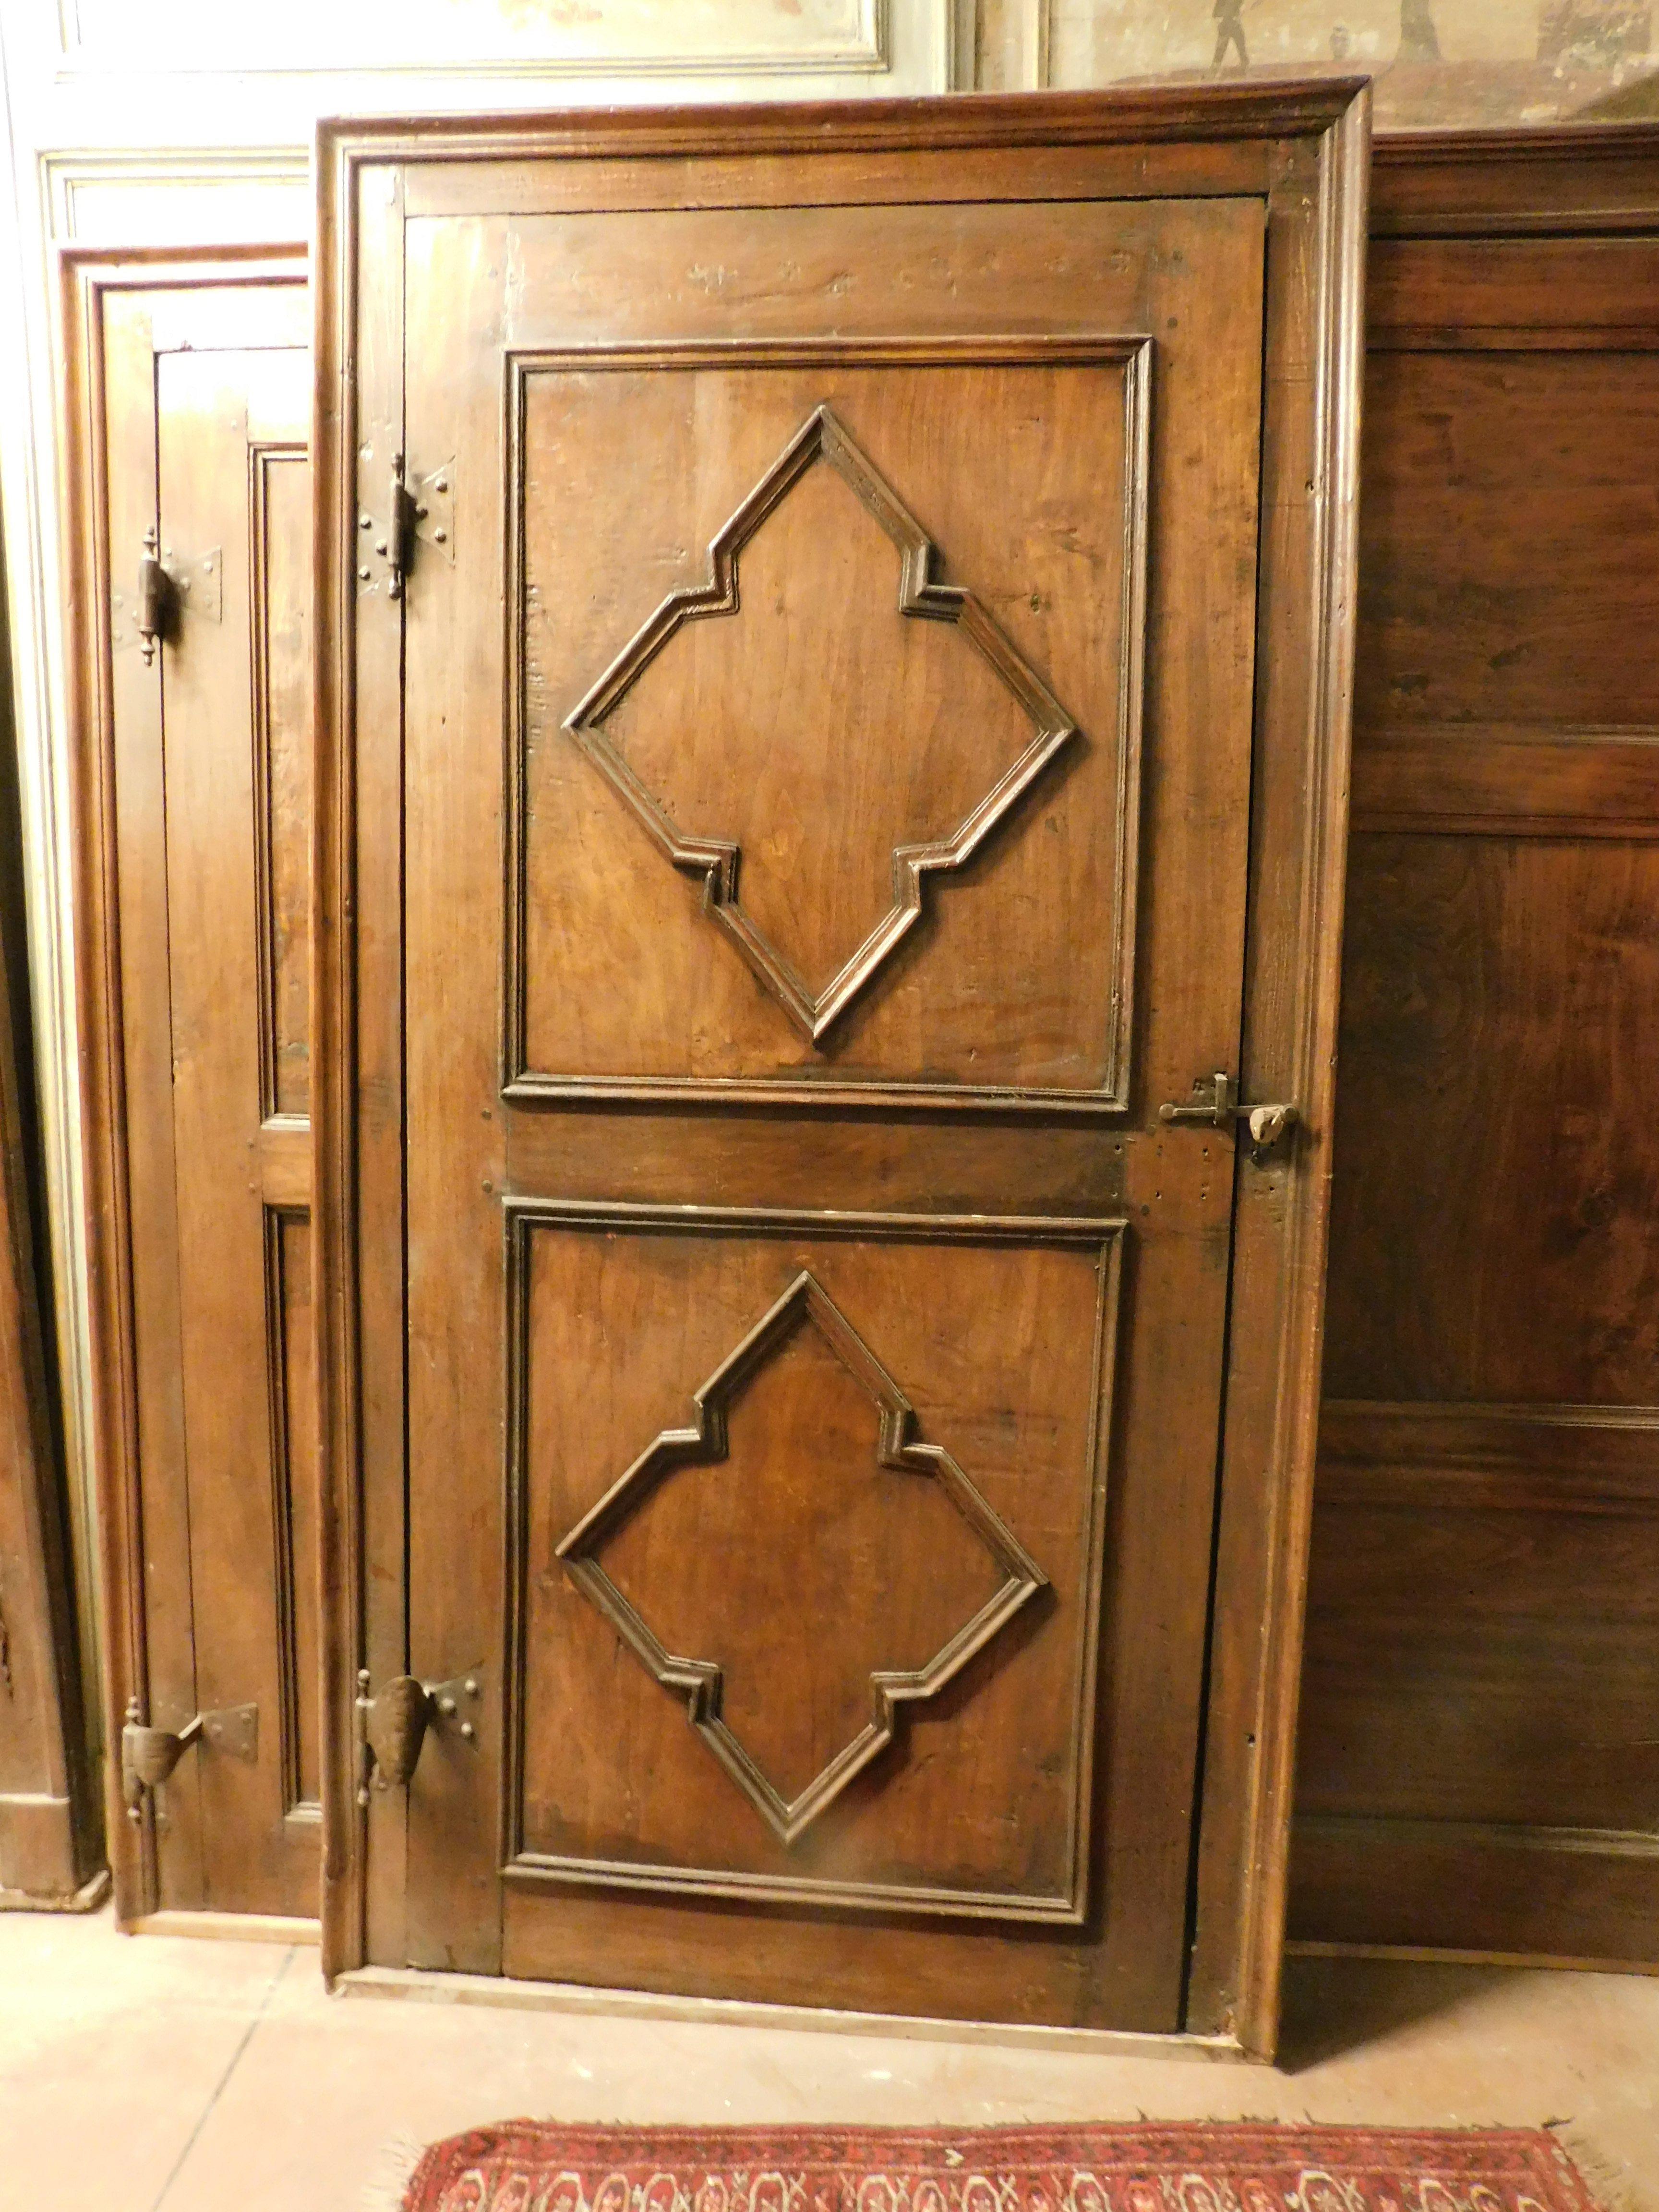 set of 3 sculpted poplar doors, coming from the same house even if not identical: two identical and one with a similar panel, all complete with original frame and irons, the panels have geometric decorations typical of the 18th century, built in